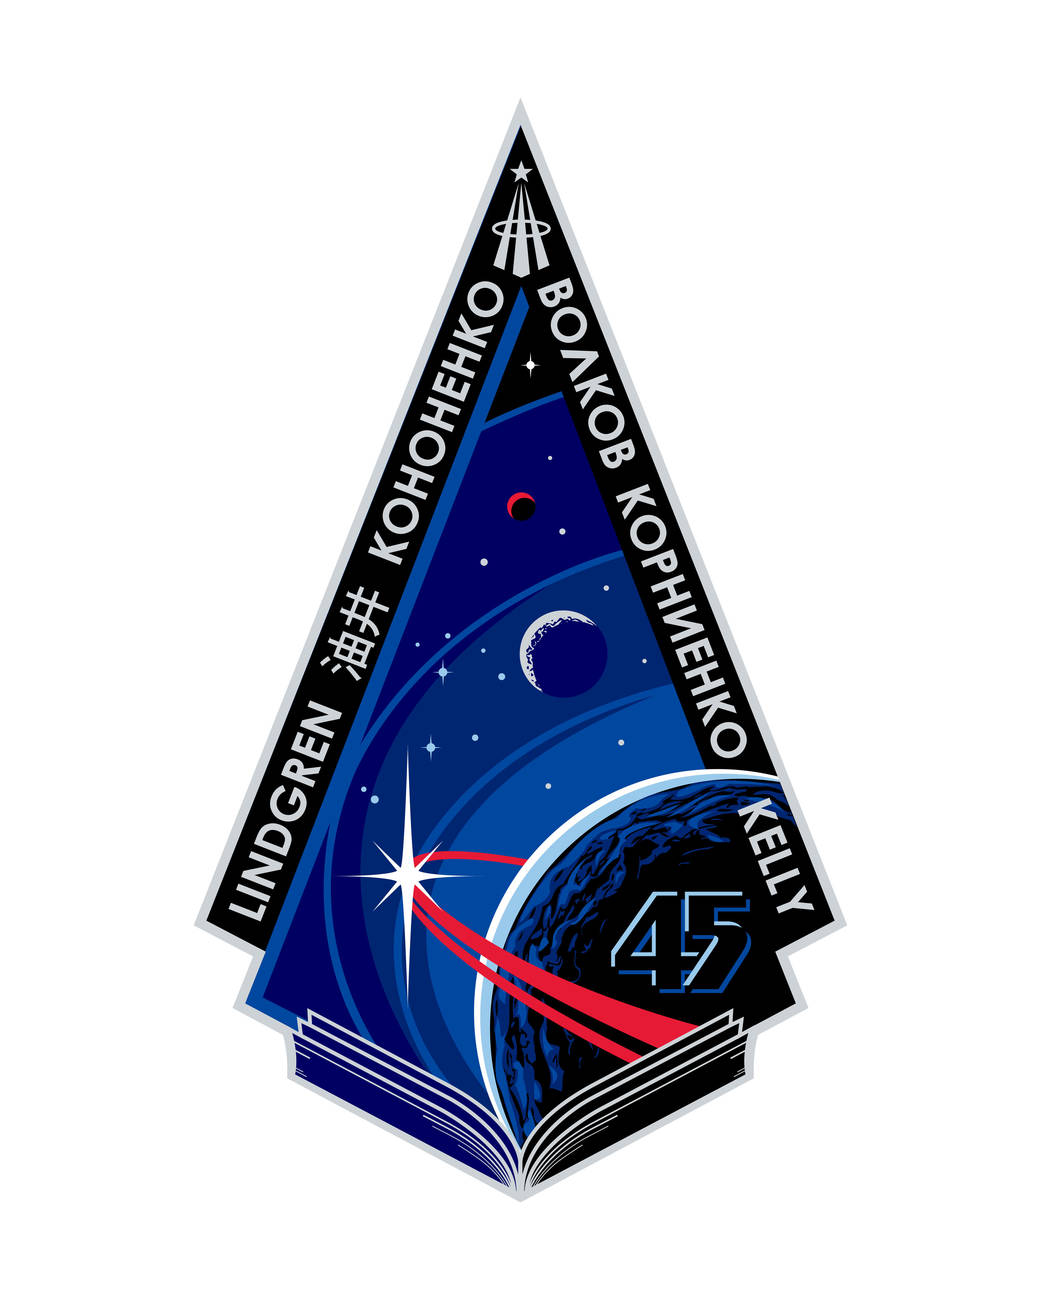 The Expedition 45 Insignia